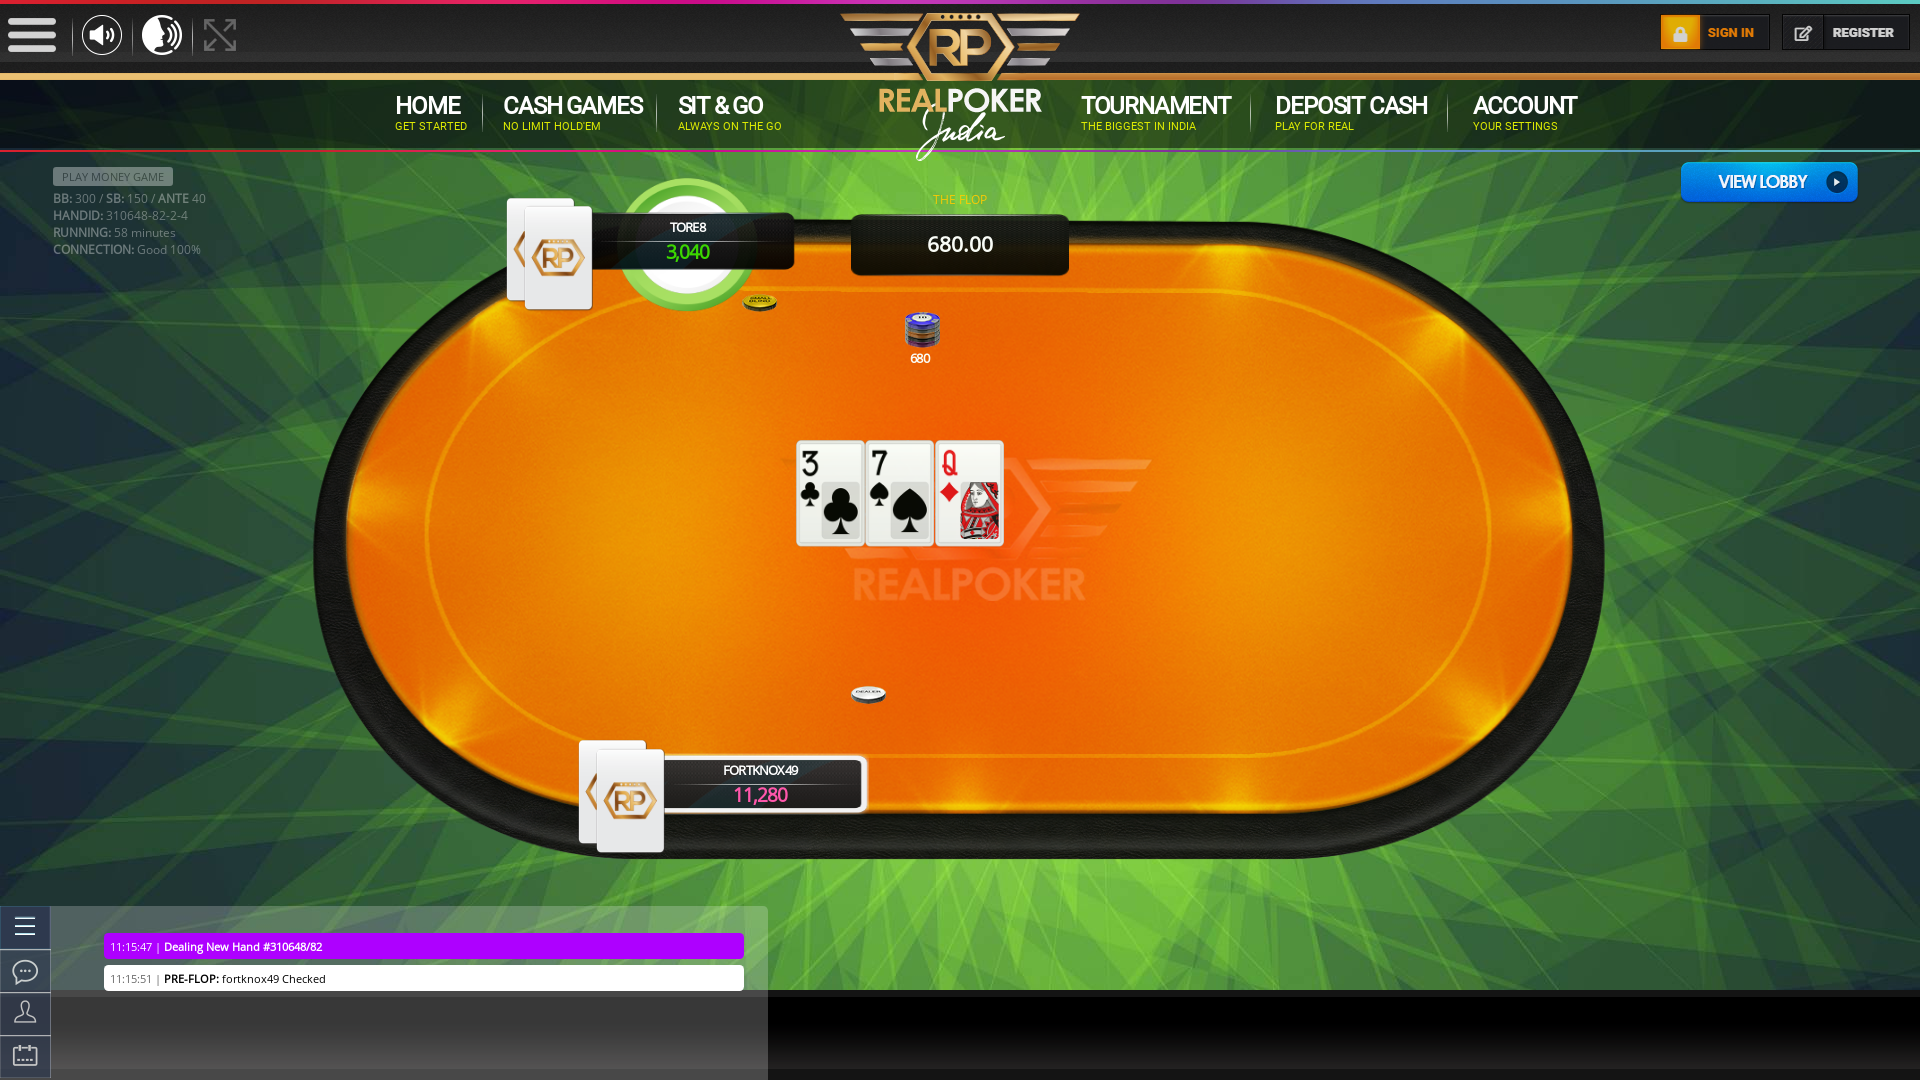 BTM Layout, Bangalore texas holdem poker table on a 10 player table in the 58th minute